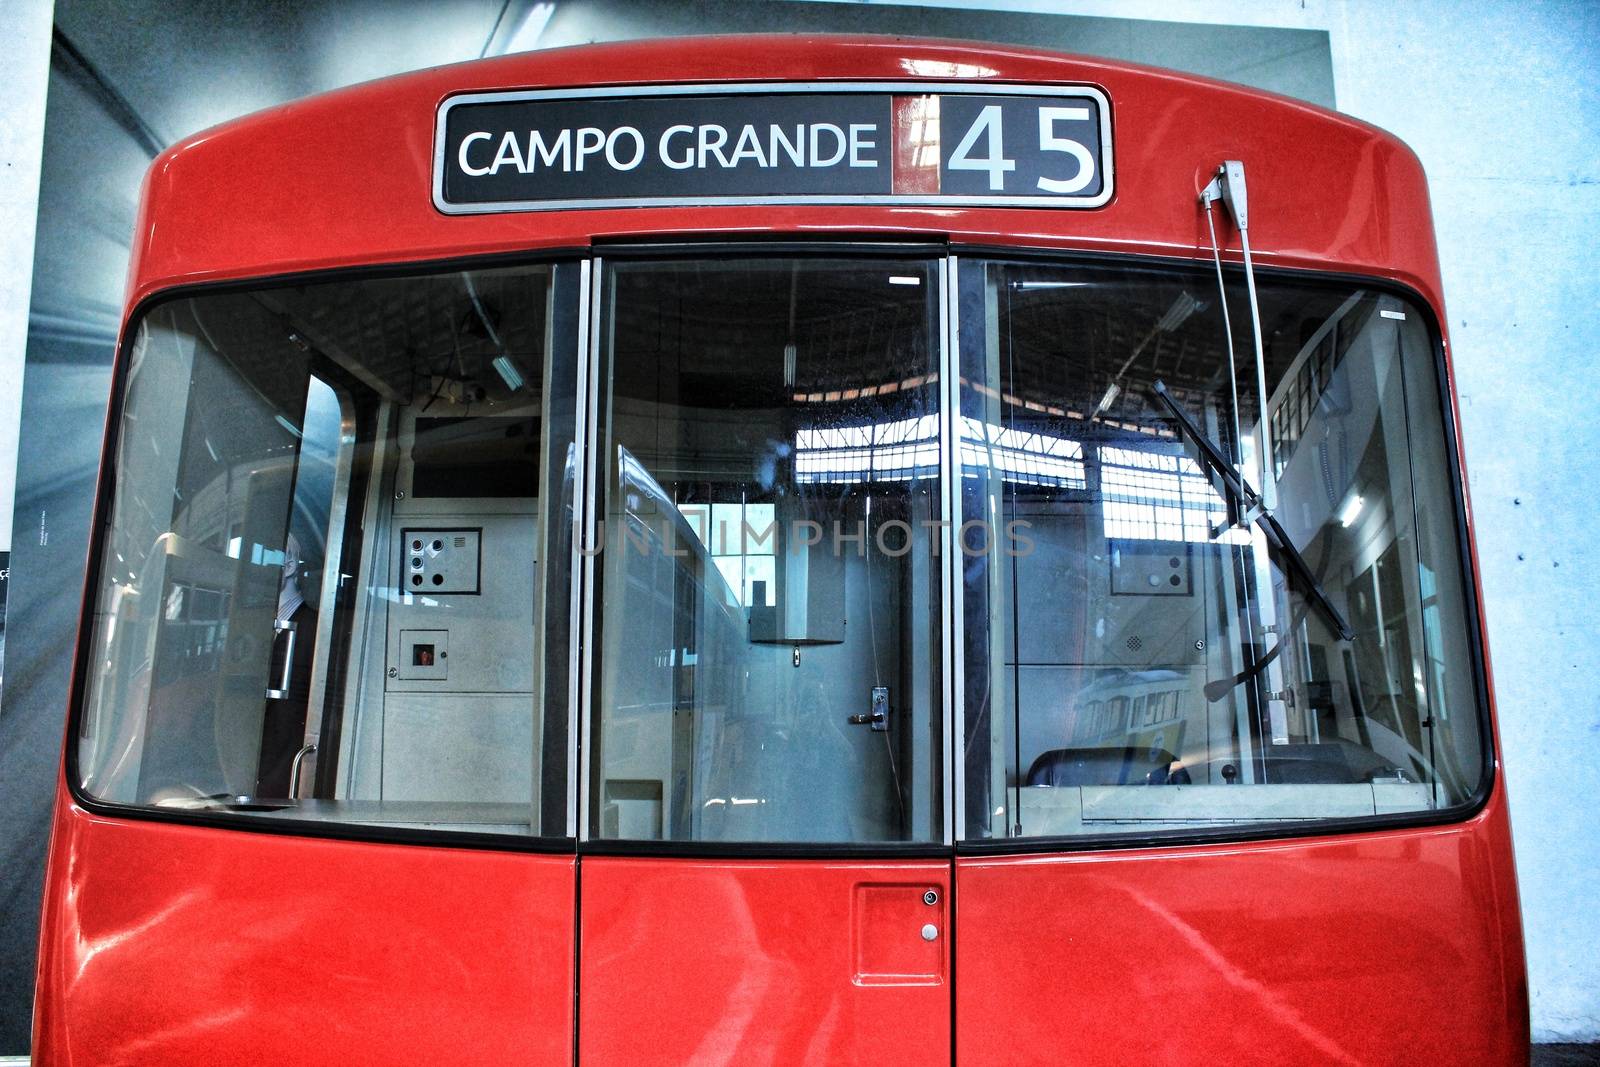 Reproduction of red subway cabin in Lisbon